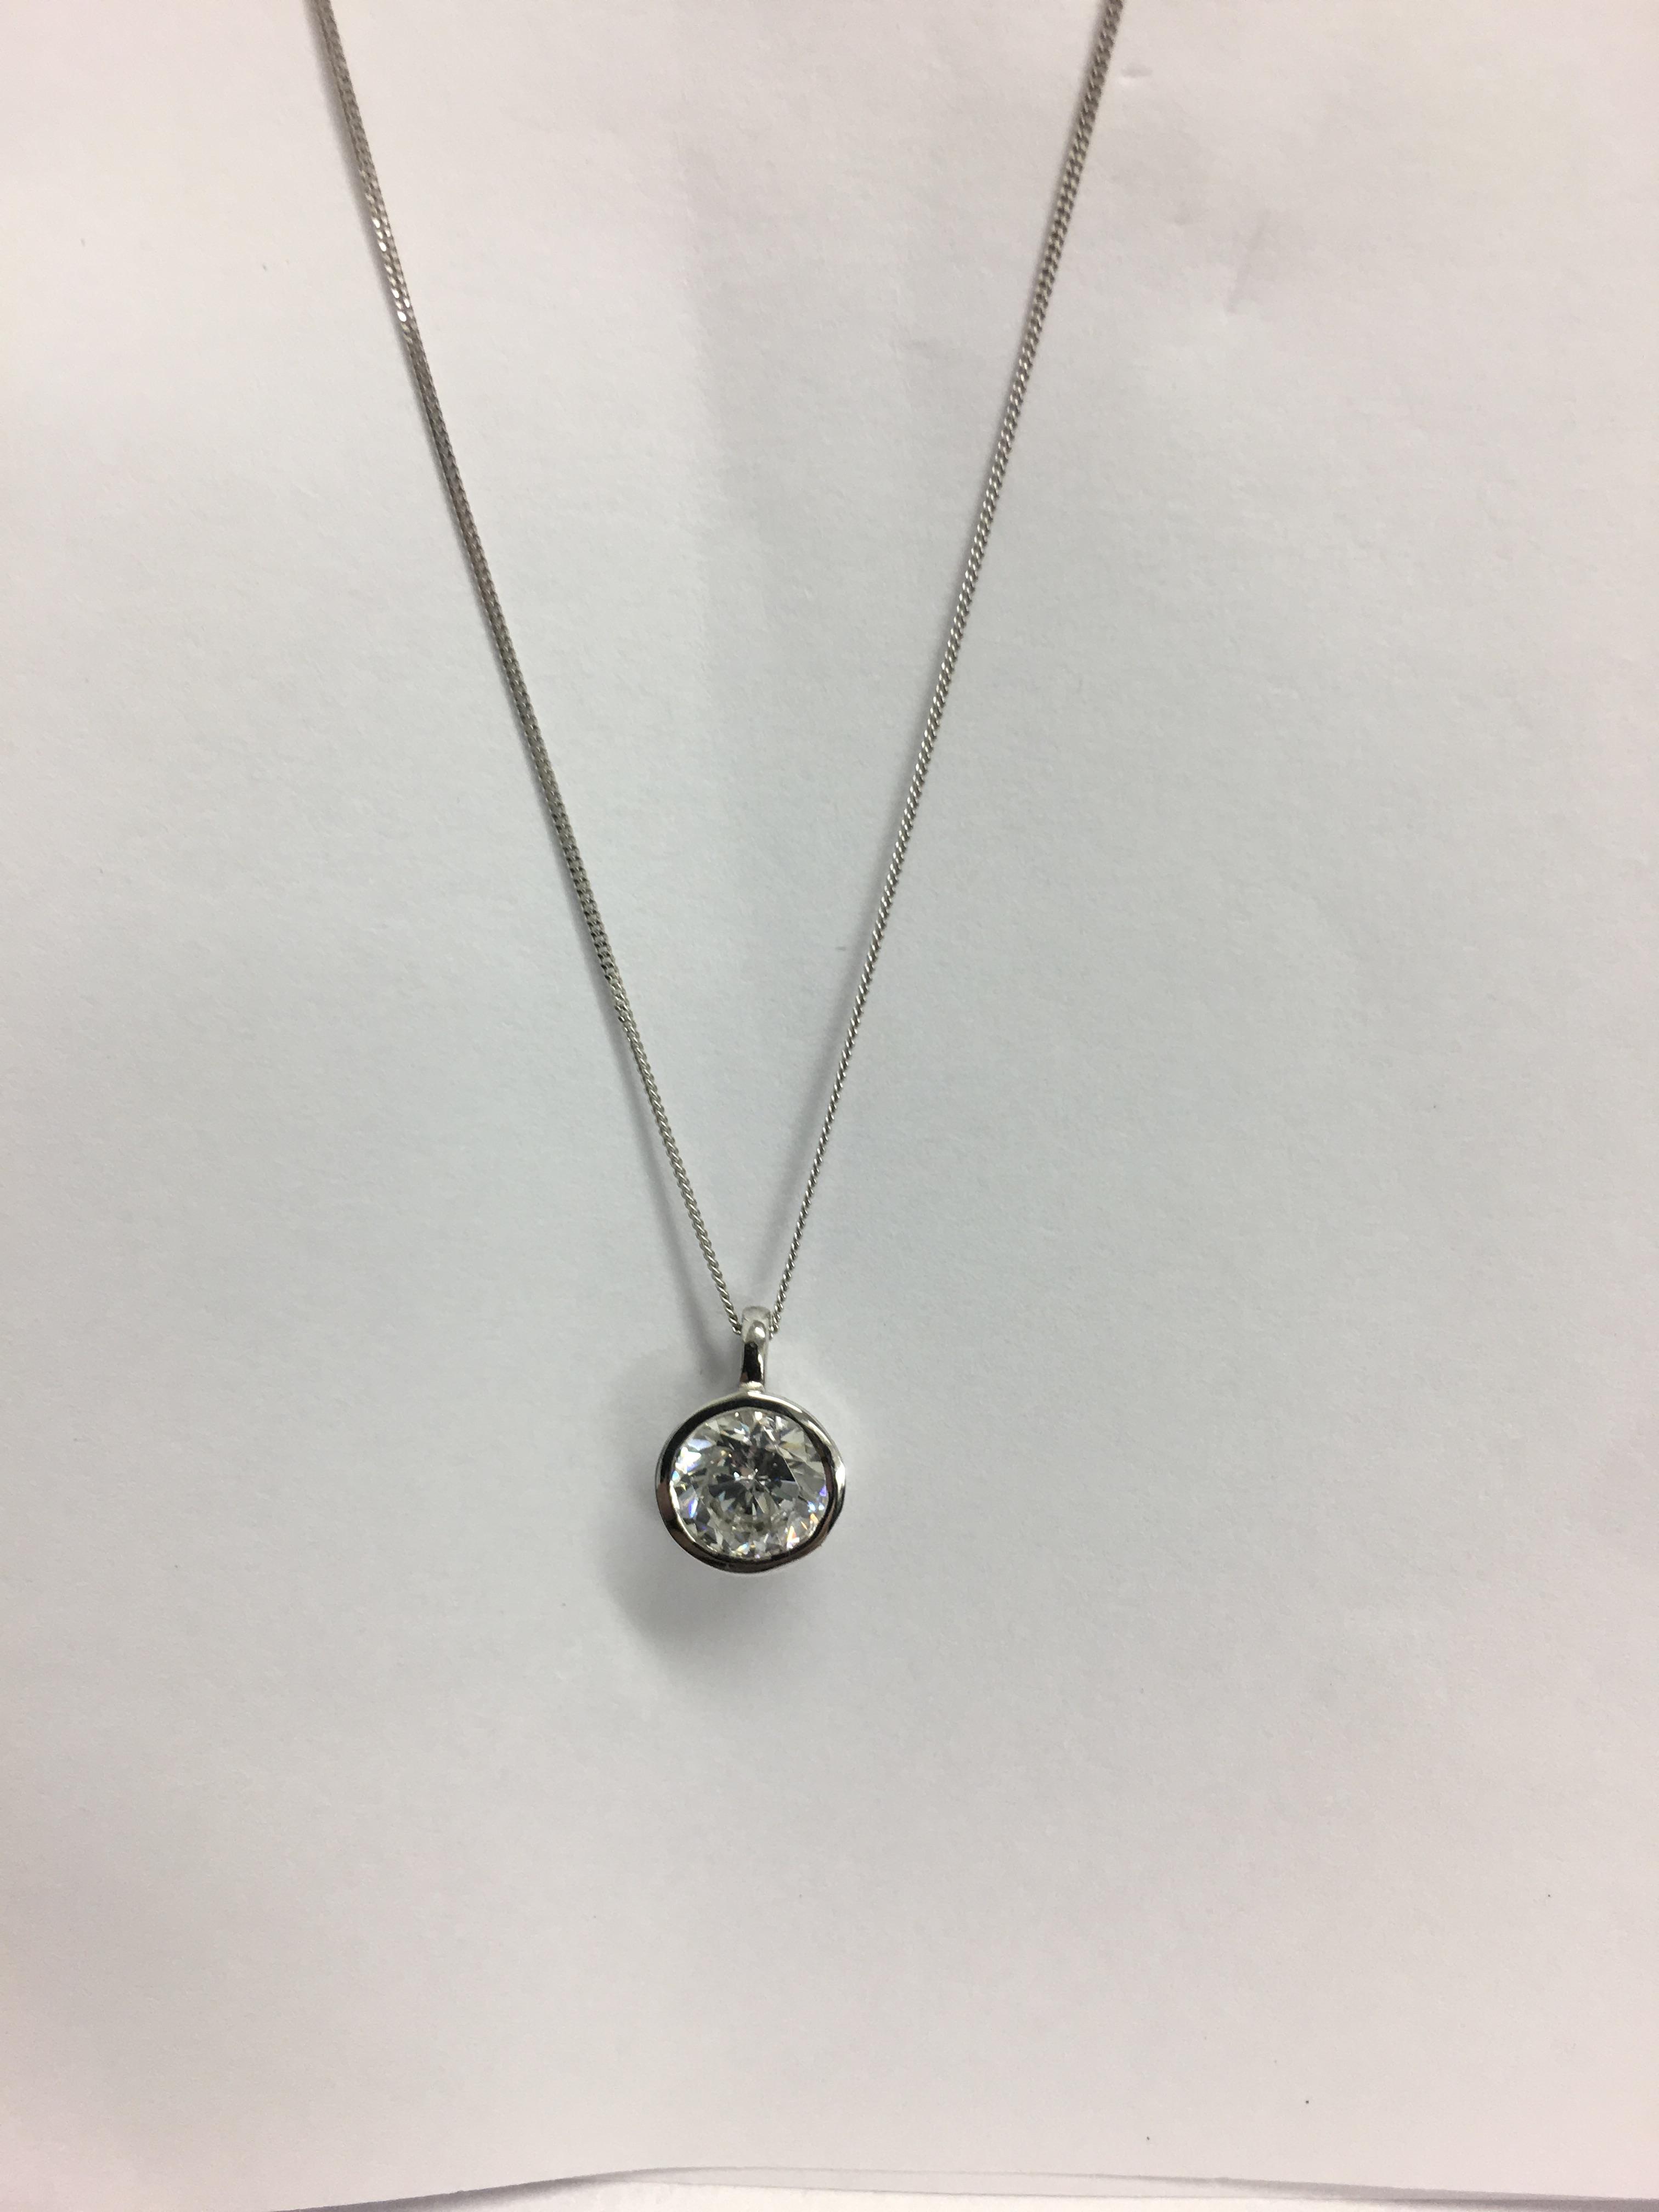 18ct gold diamond pendant and necklace - Image 2 of 5